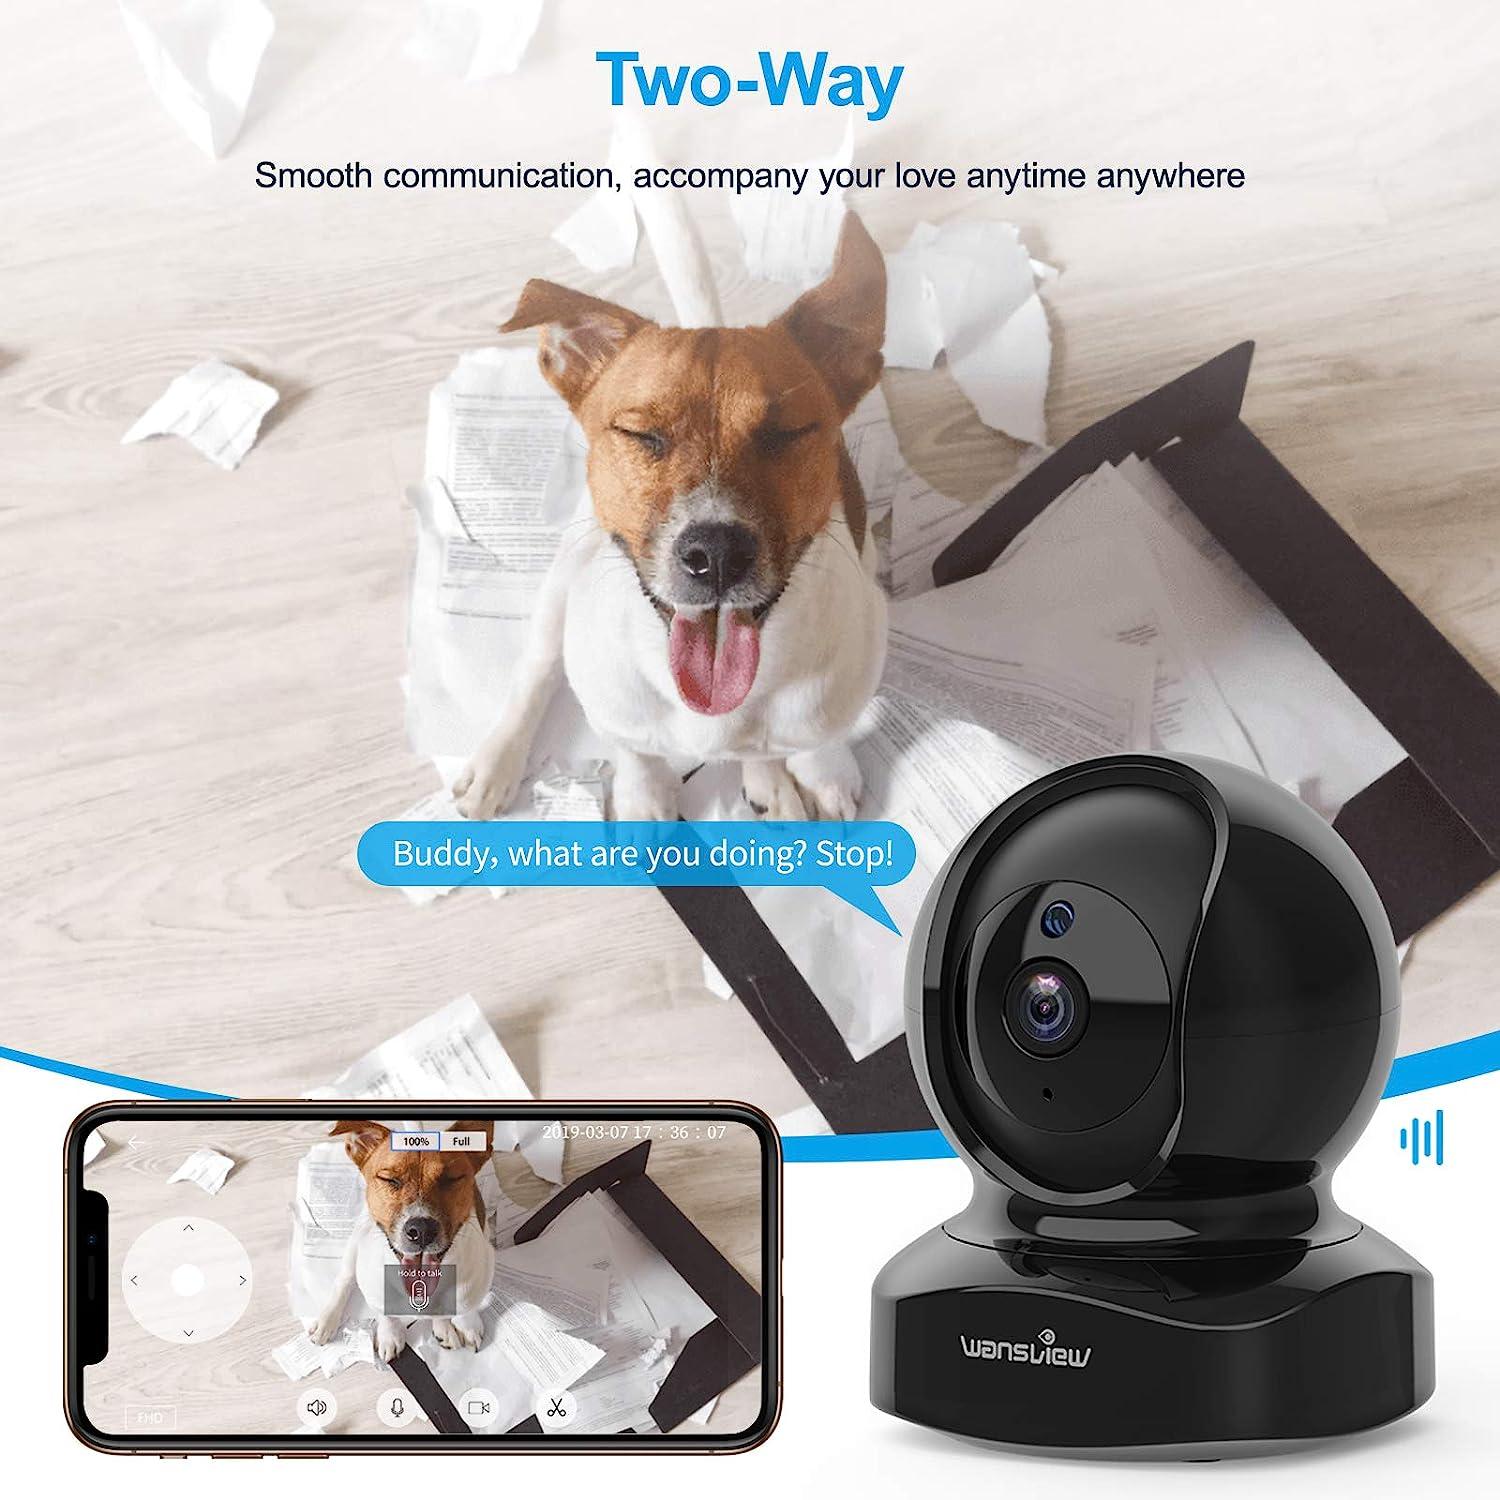 Wansview Baby Monitor Camera, 2K Wireless Security Camera for Home, WiFi  Pet Camera for Dog and Cat, 2 Way Audio, Night Vision, Works with Alexa Q6-W